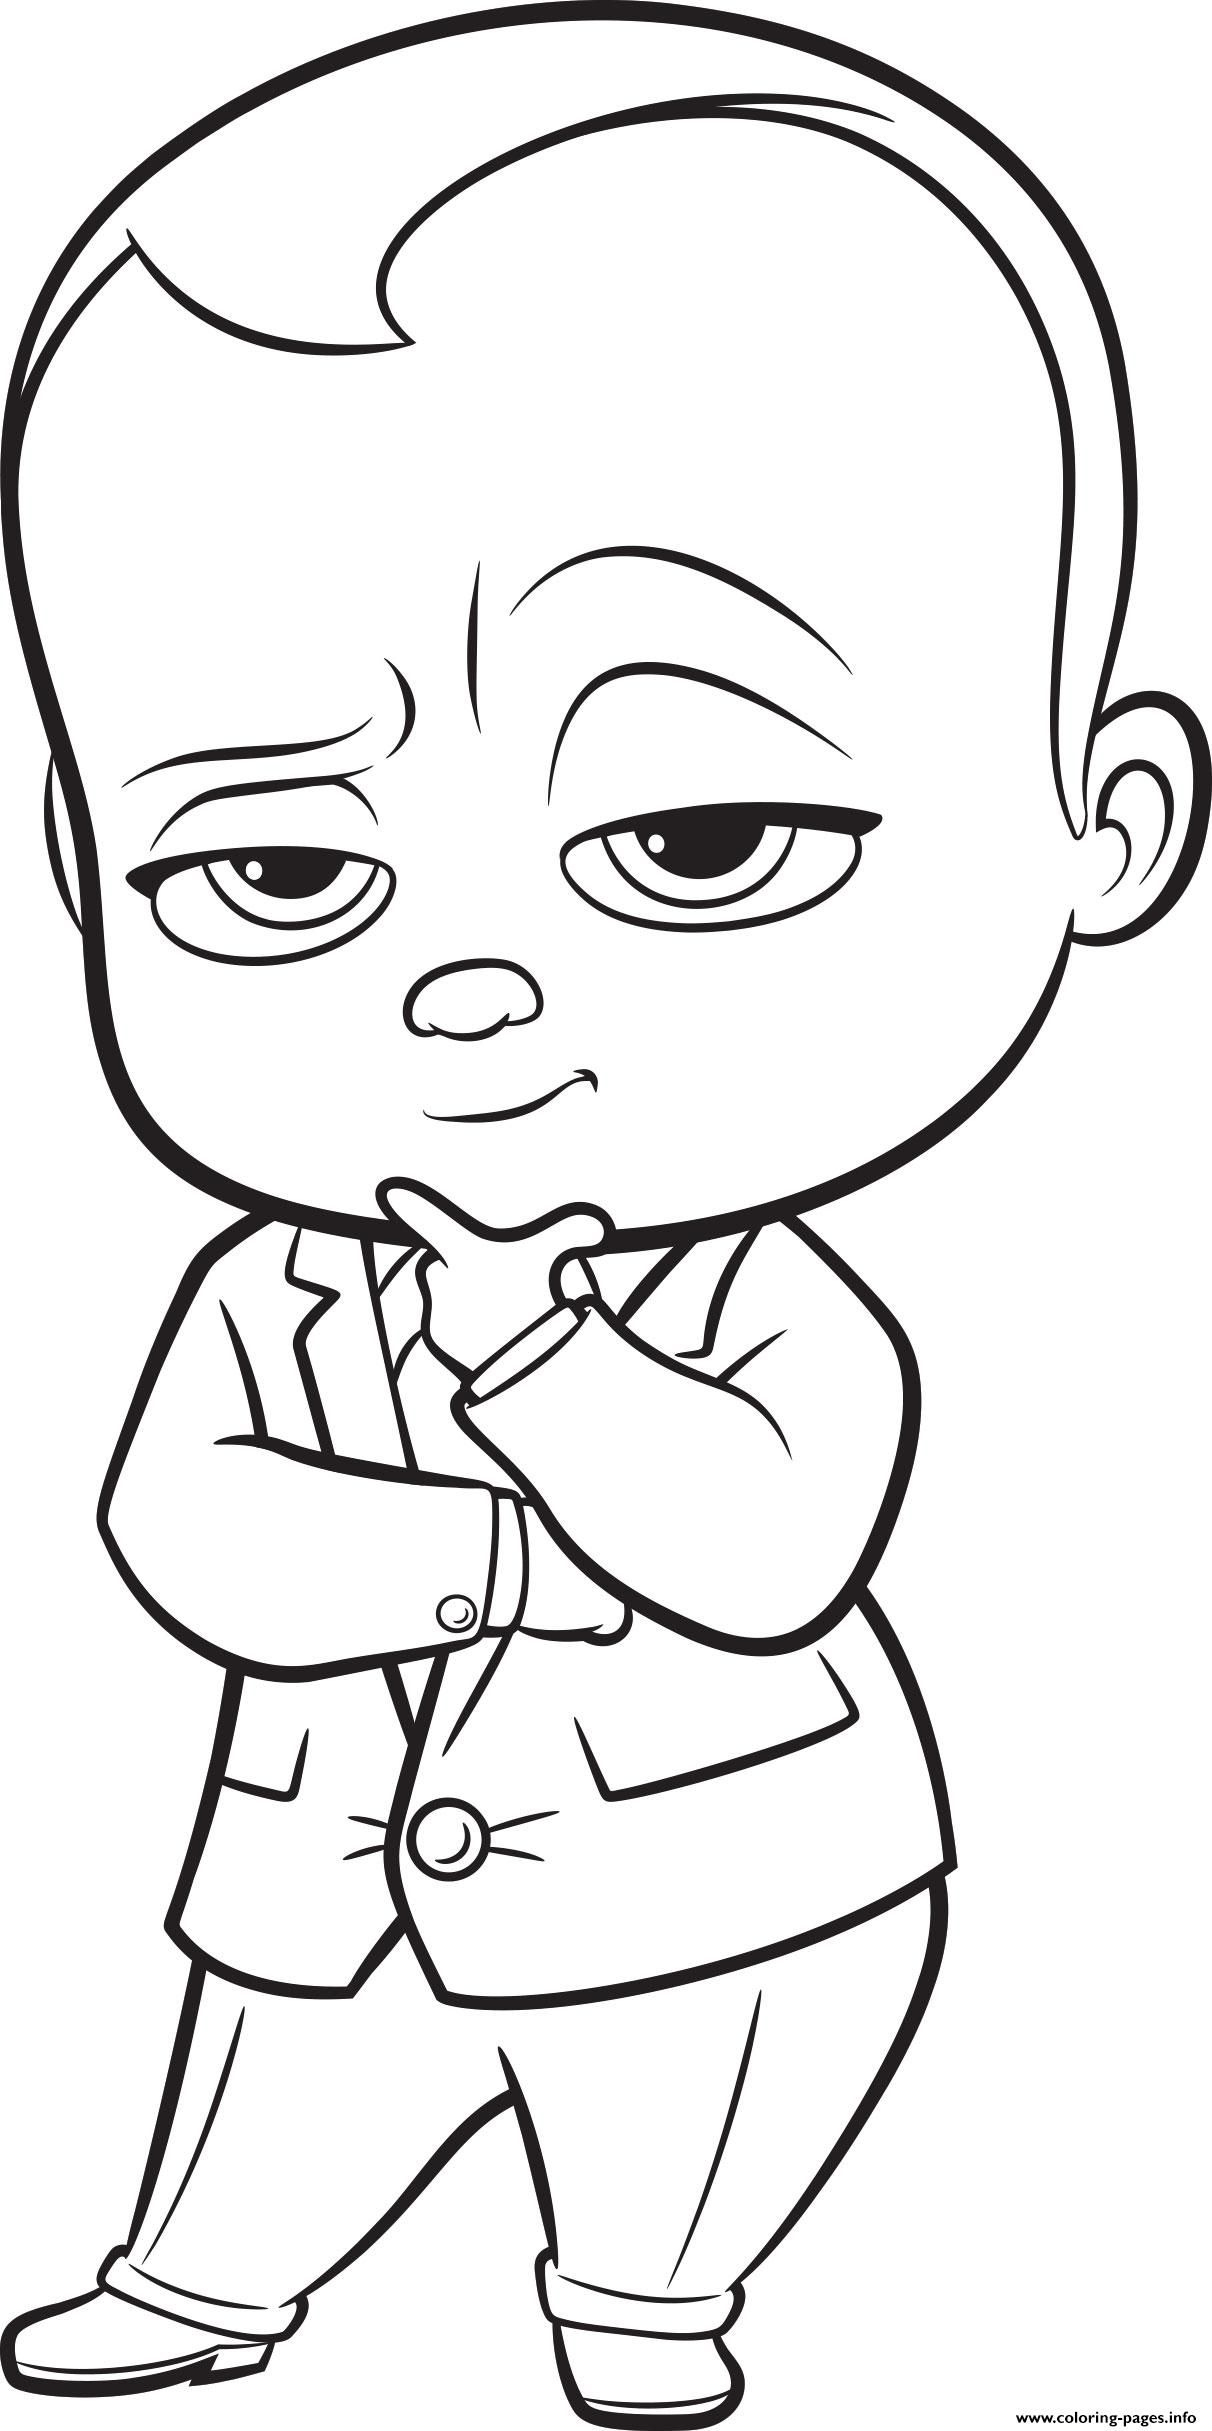 Print The Boss Baby colouring coloring pages in 2019 | Baby ...